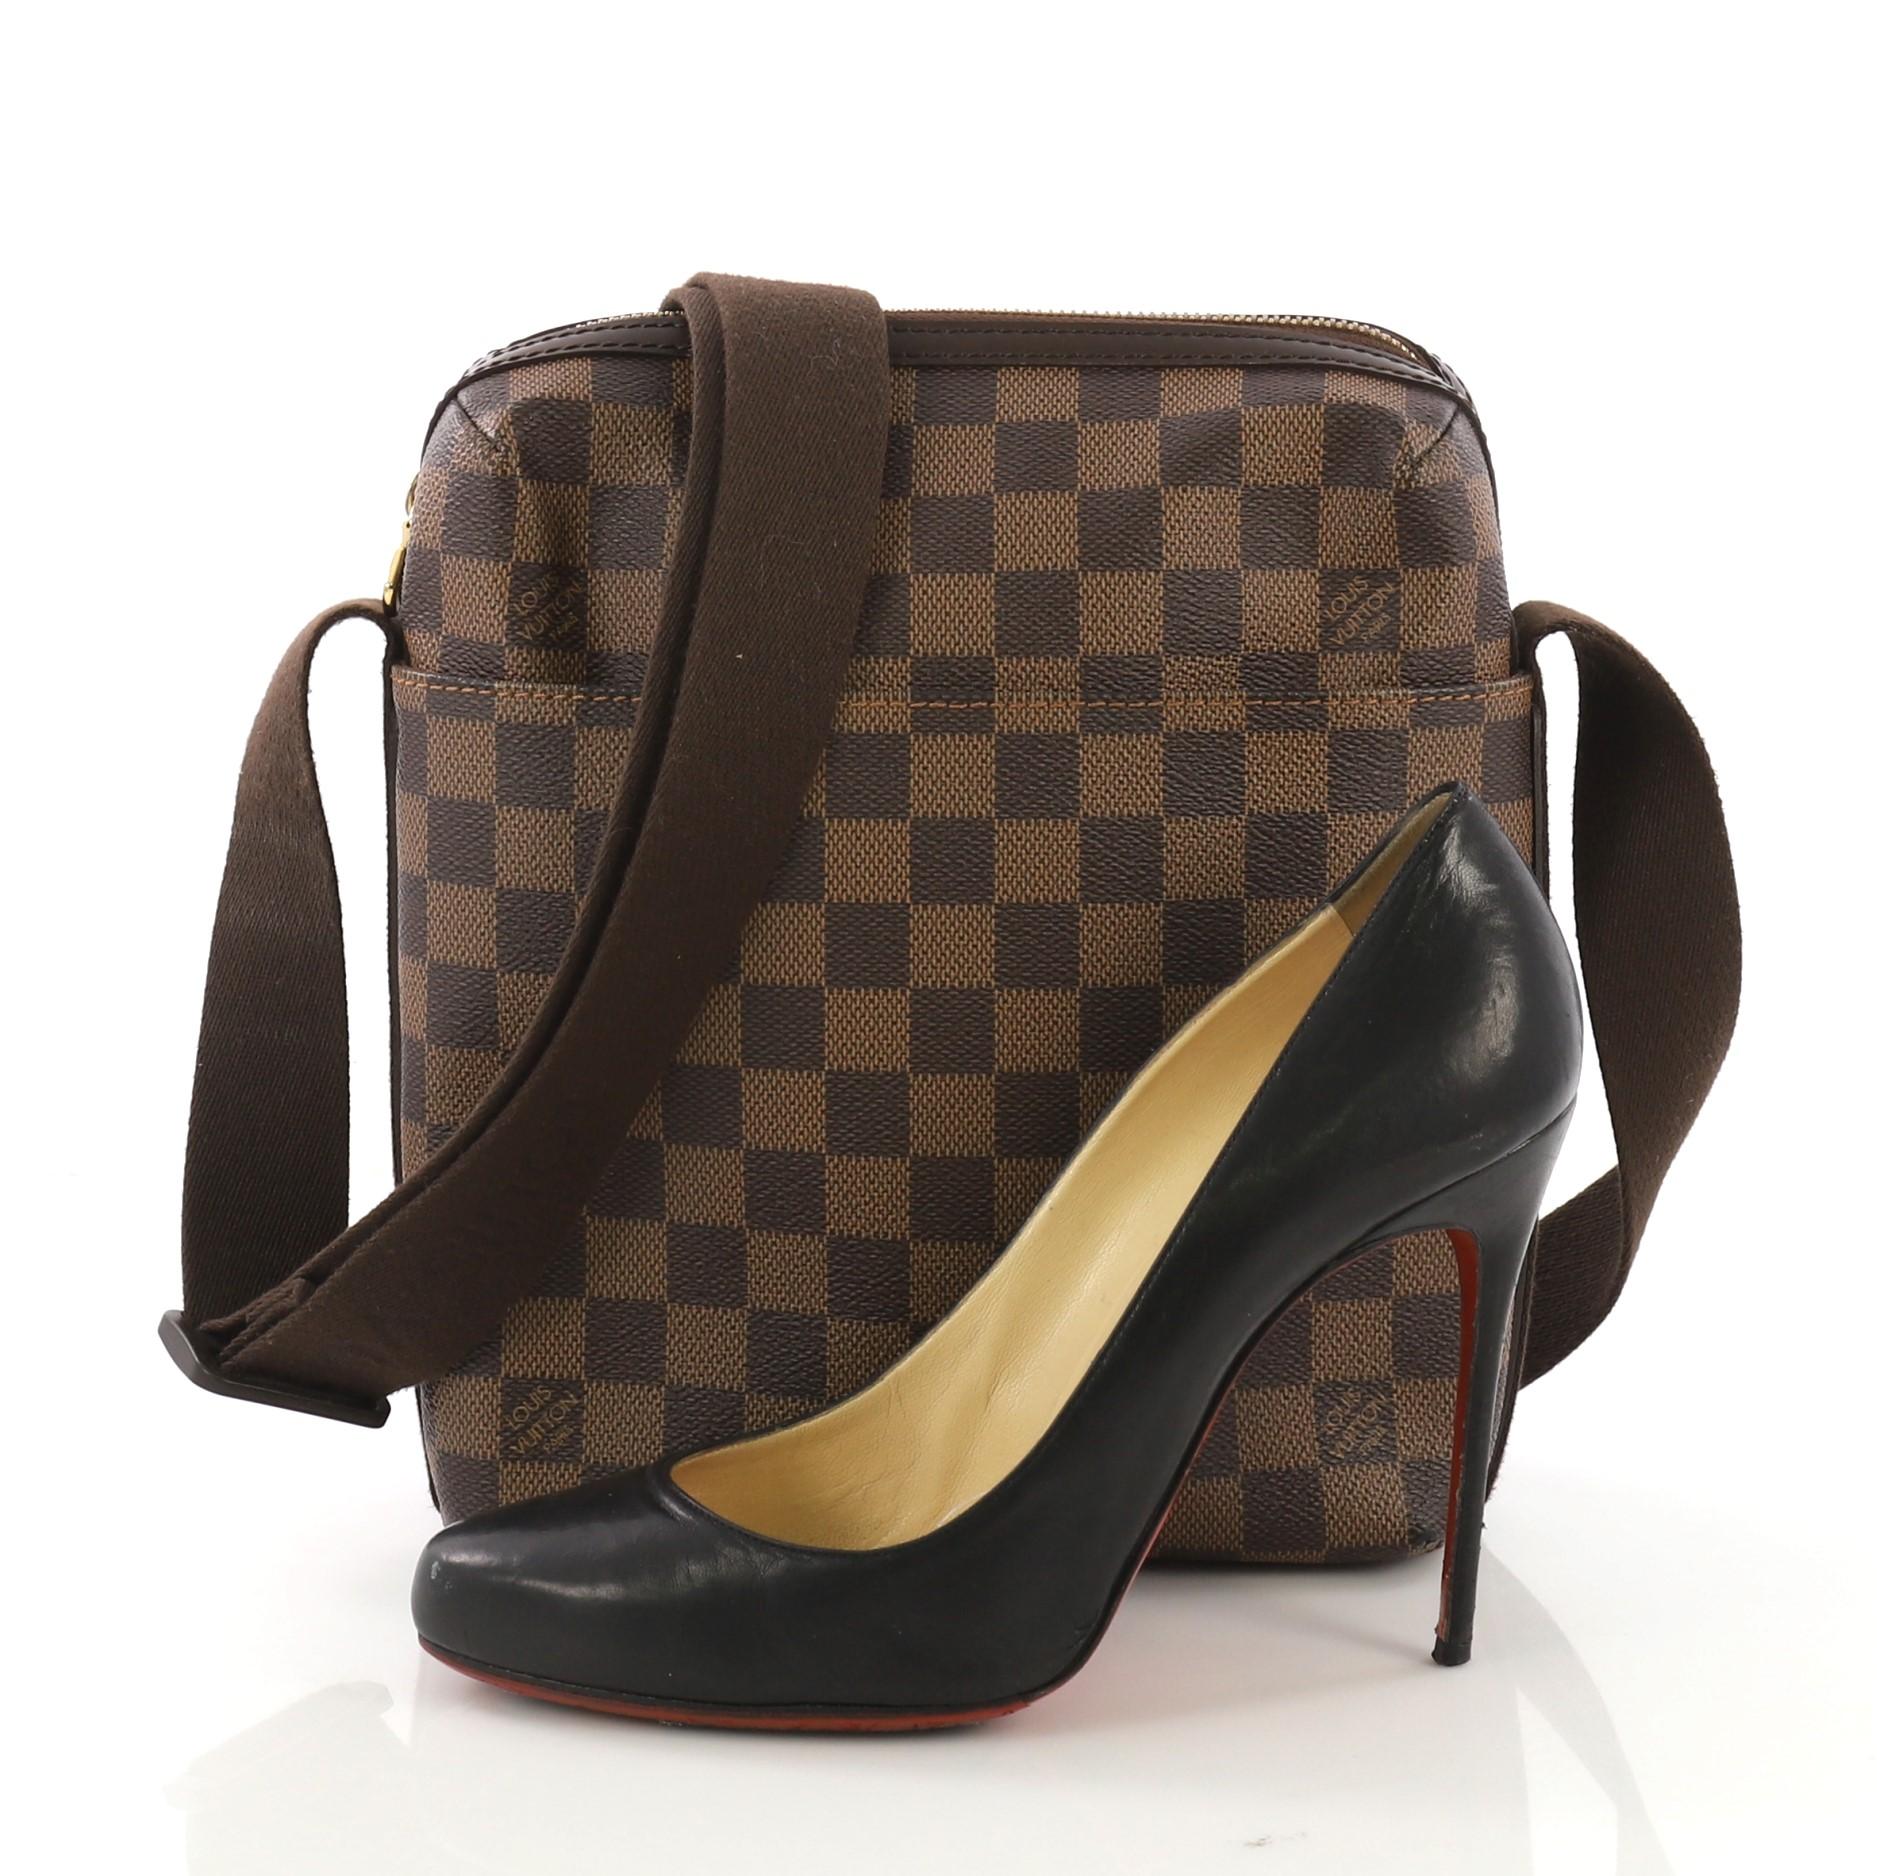 This Louis Vuitton Trotteur Beaubourg Handbag Damier, crafted from damier ebene coated canvas, features an adjustable canvas strap, exterior front slip pocket and gold-tone hardware. Its zip closure opens to a brown fabric interior with slip pocket.